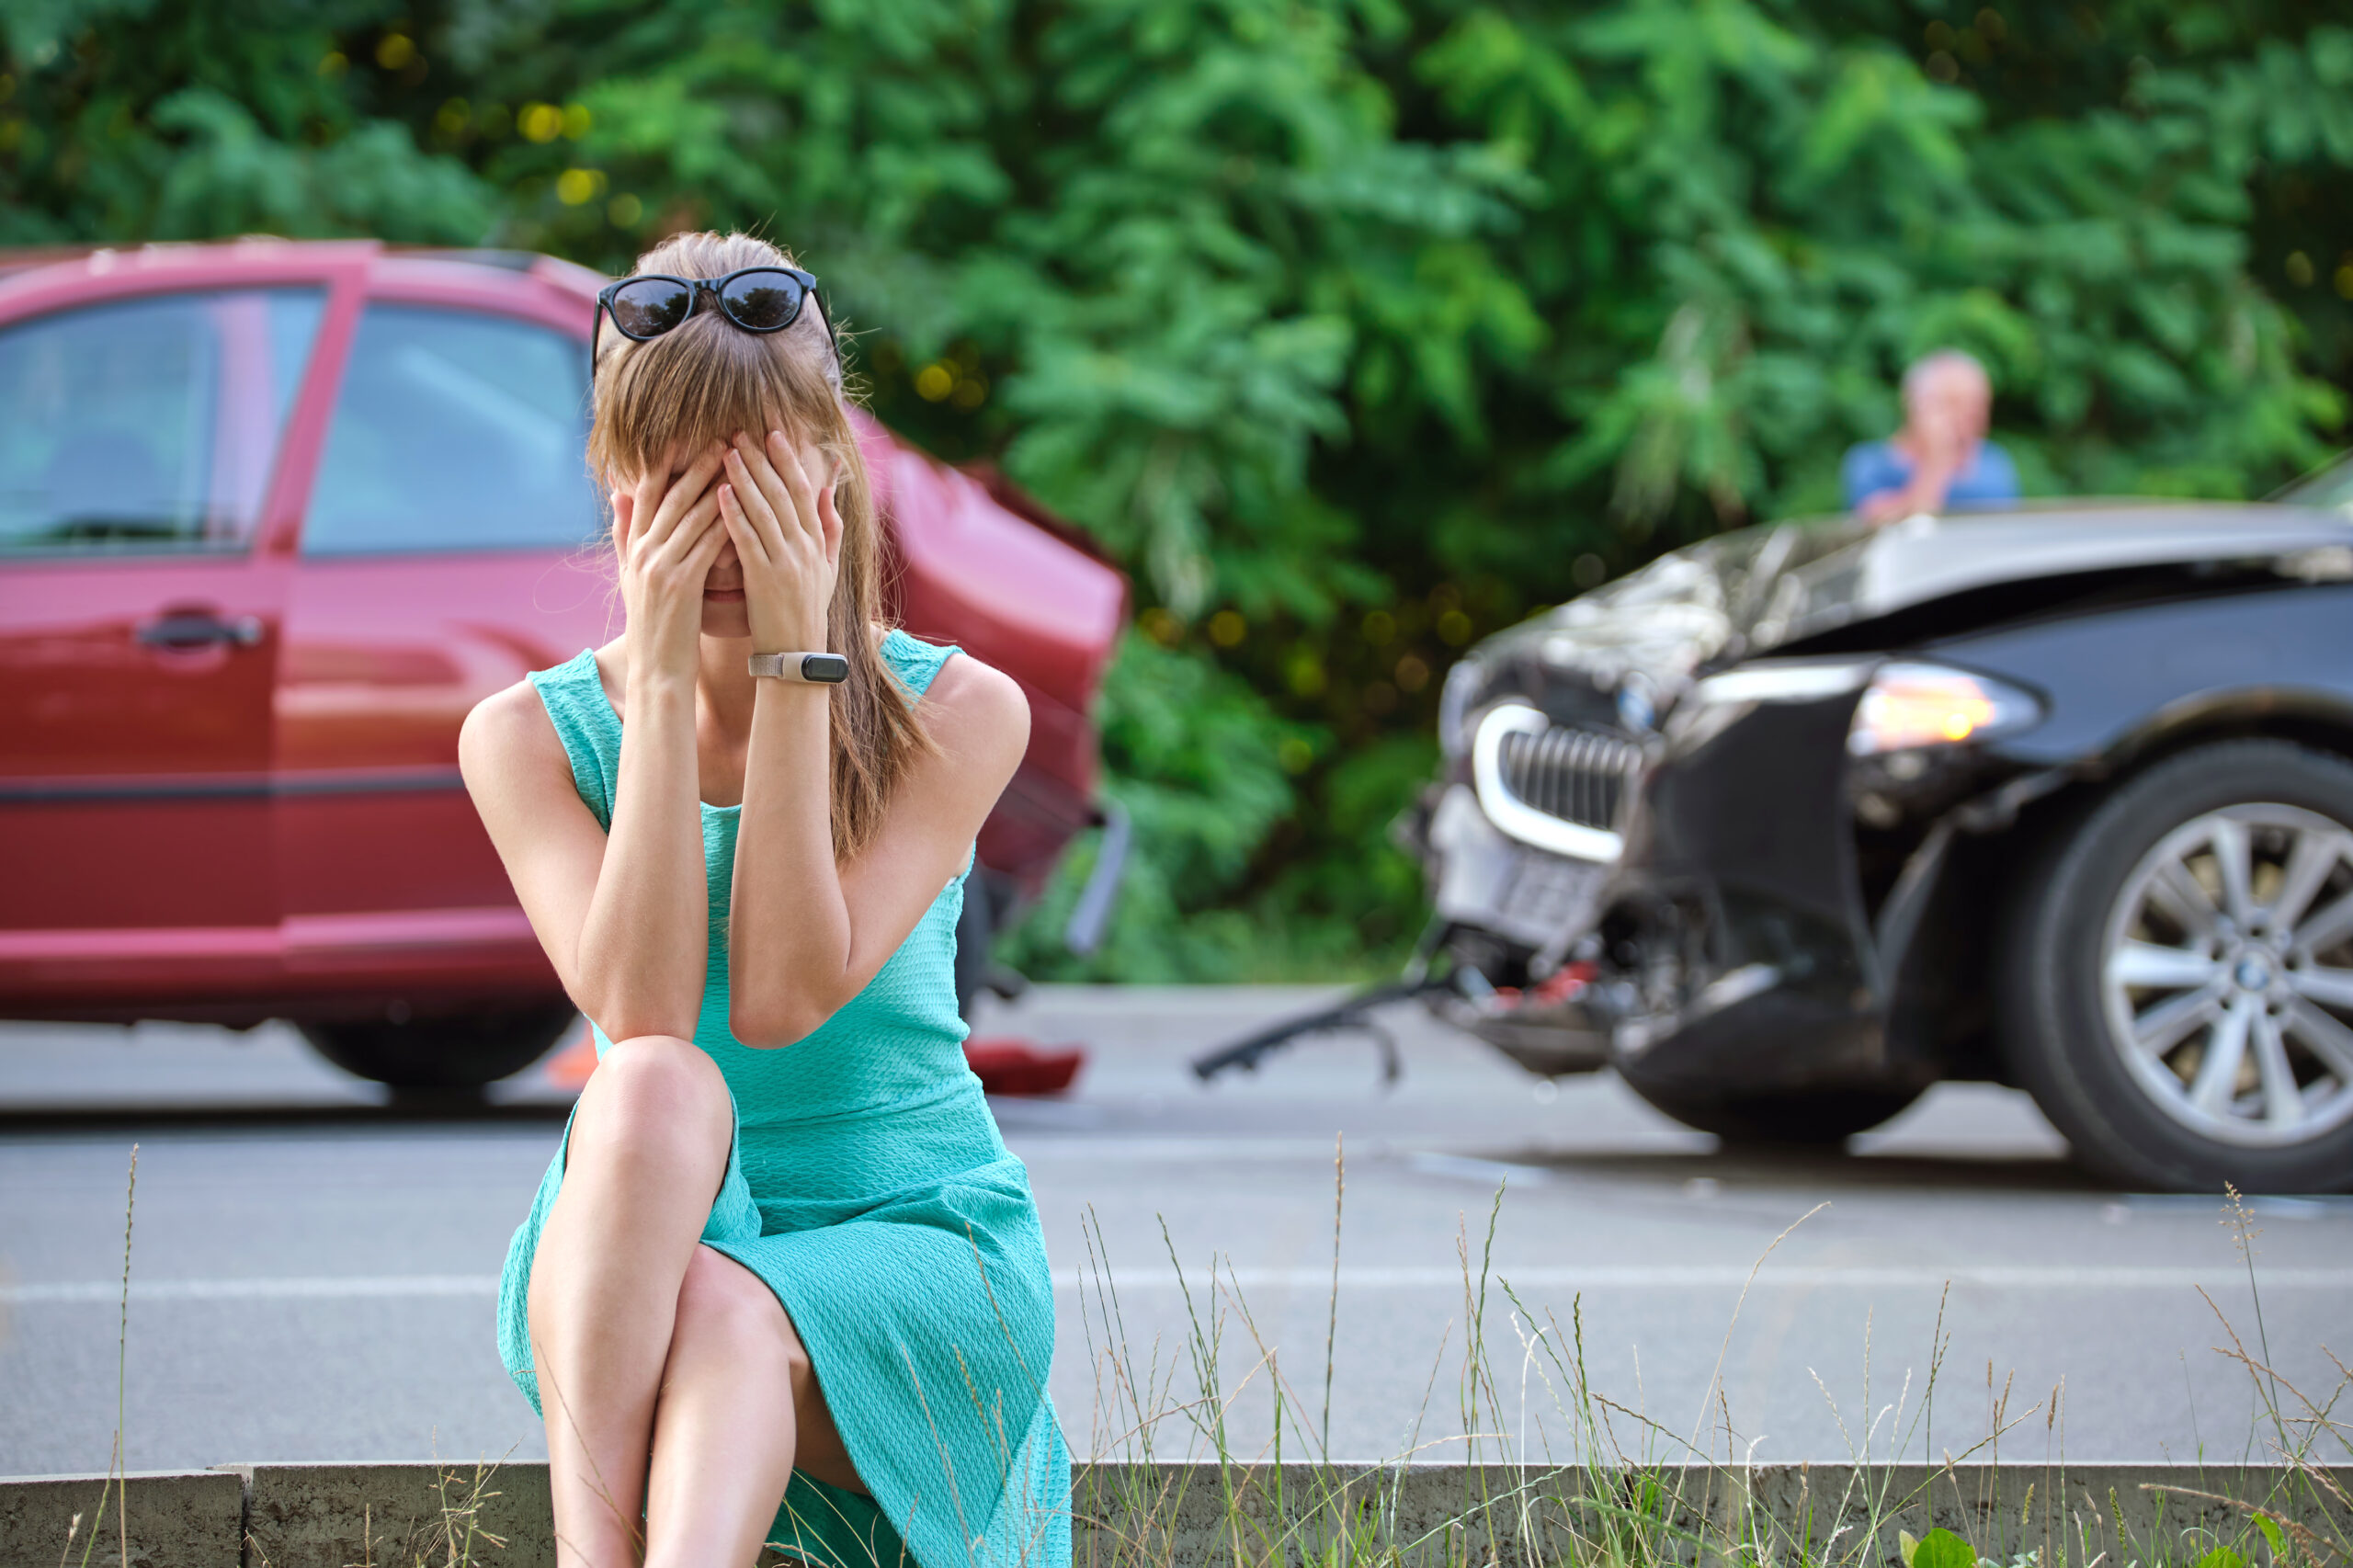 Stressed woman driver sitting on street side shocked after car accident.